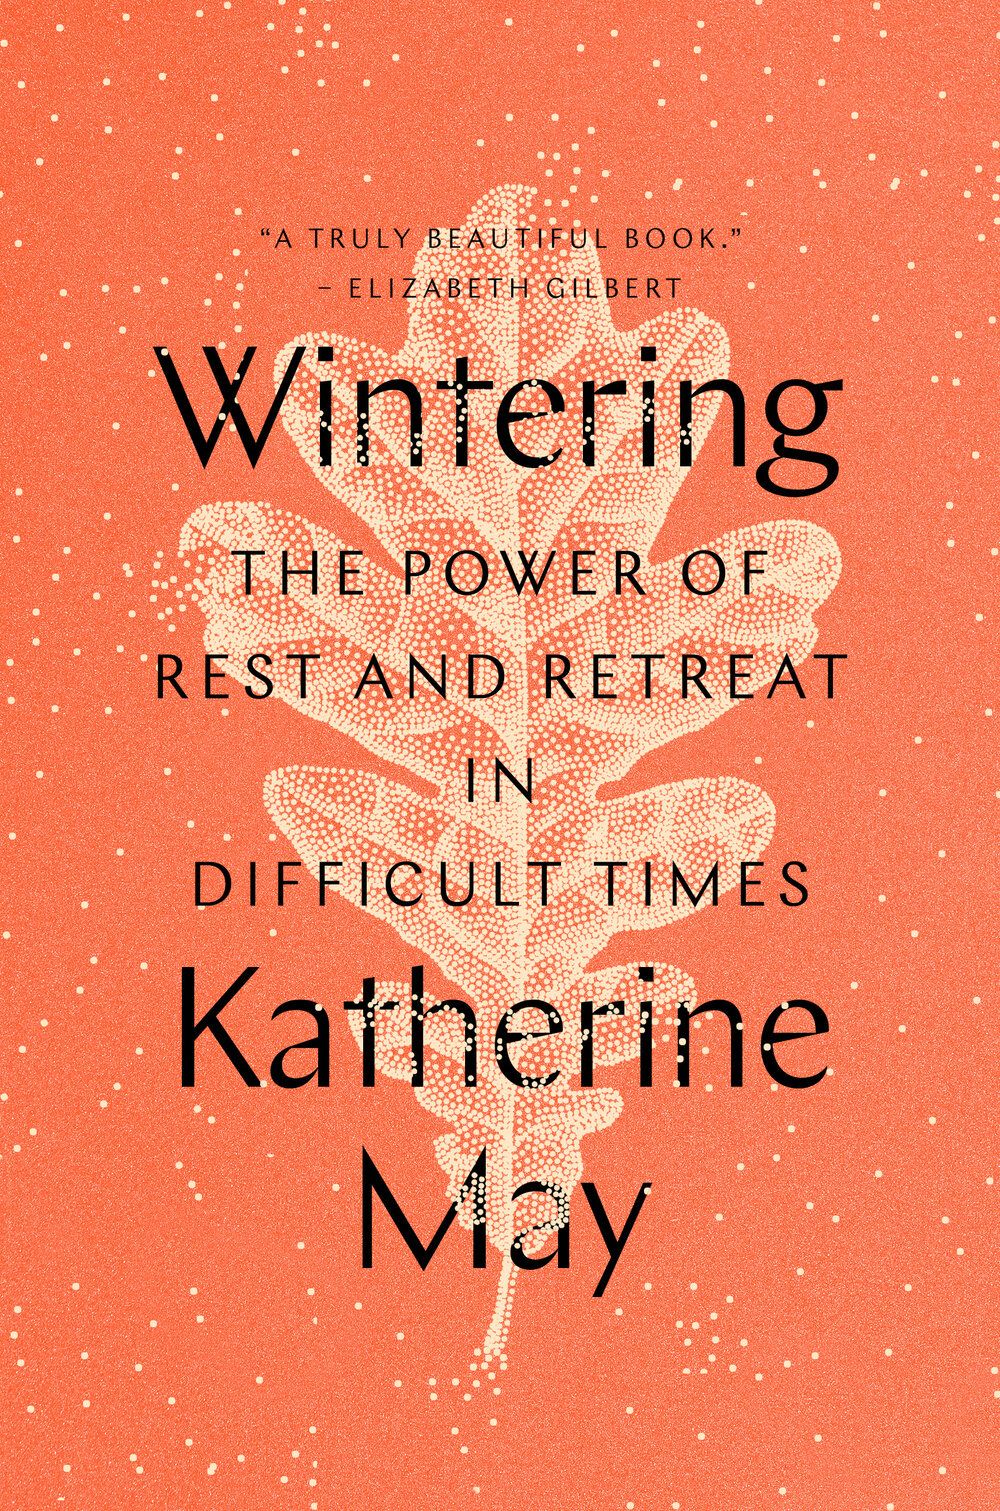 Book cover for US edition of Wintering: The Power of Rest and Retreat in Difficult times. Oak leaf made of beige dots over brick-red background.